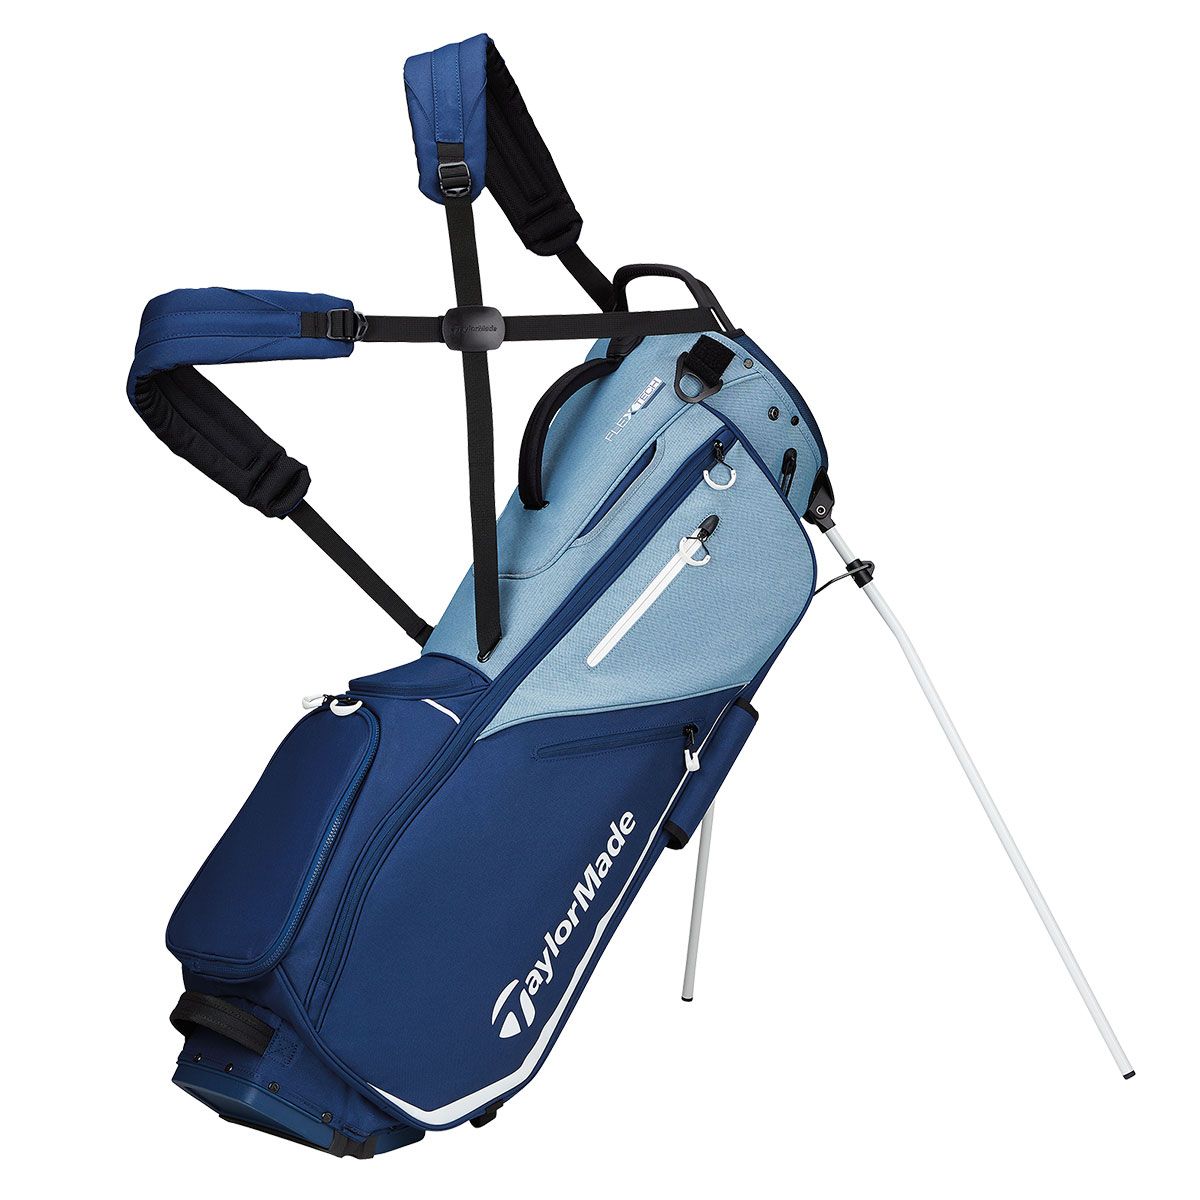 2020 Xmas Gift Guide - Golf Bags & Accessories